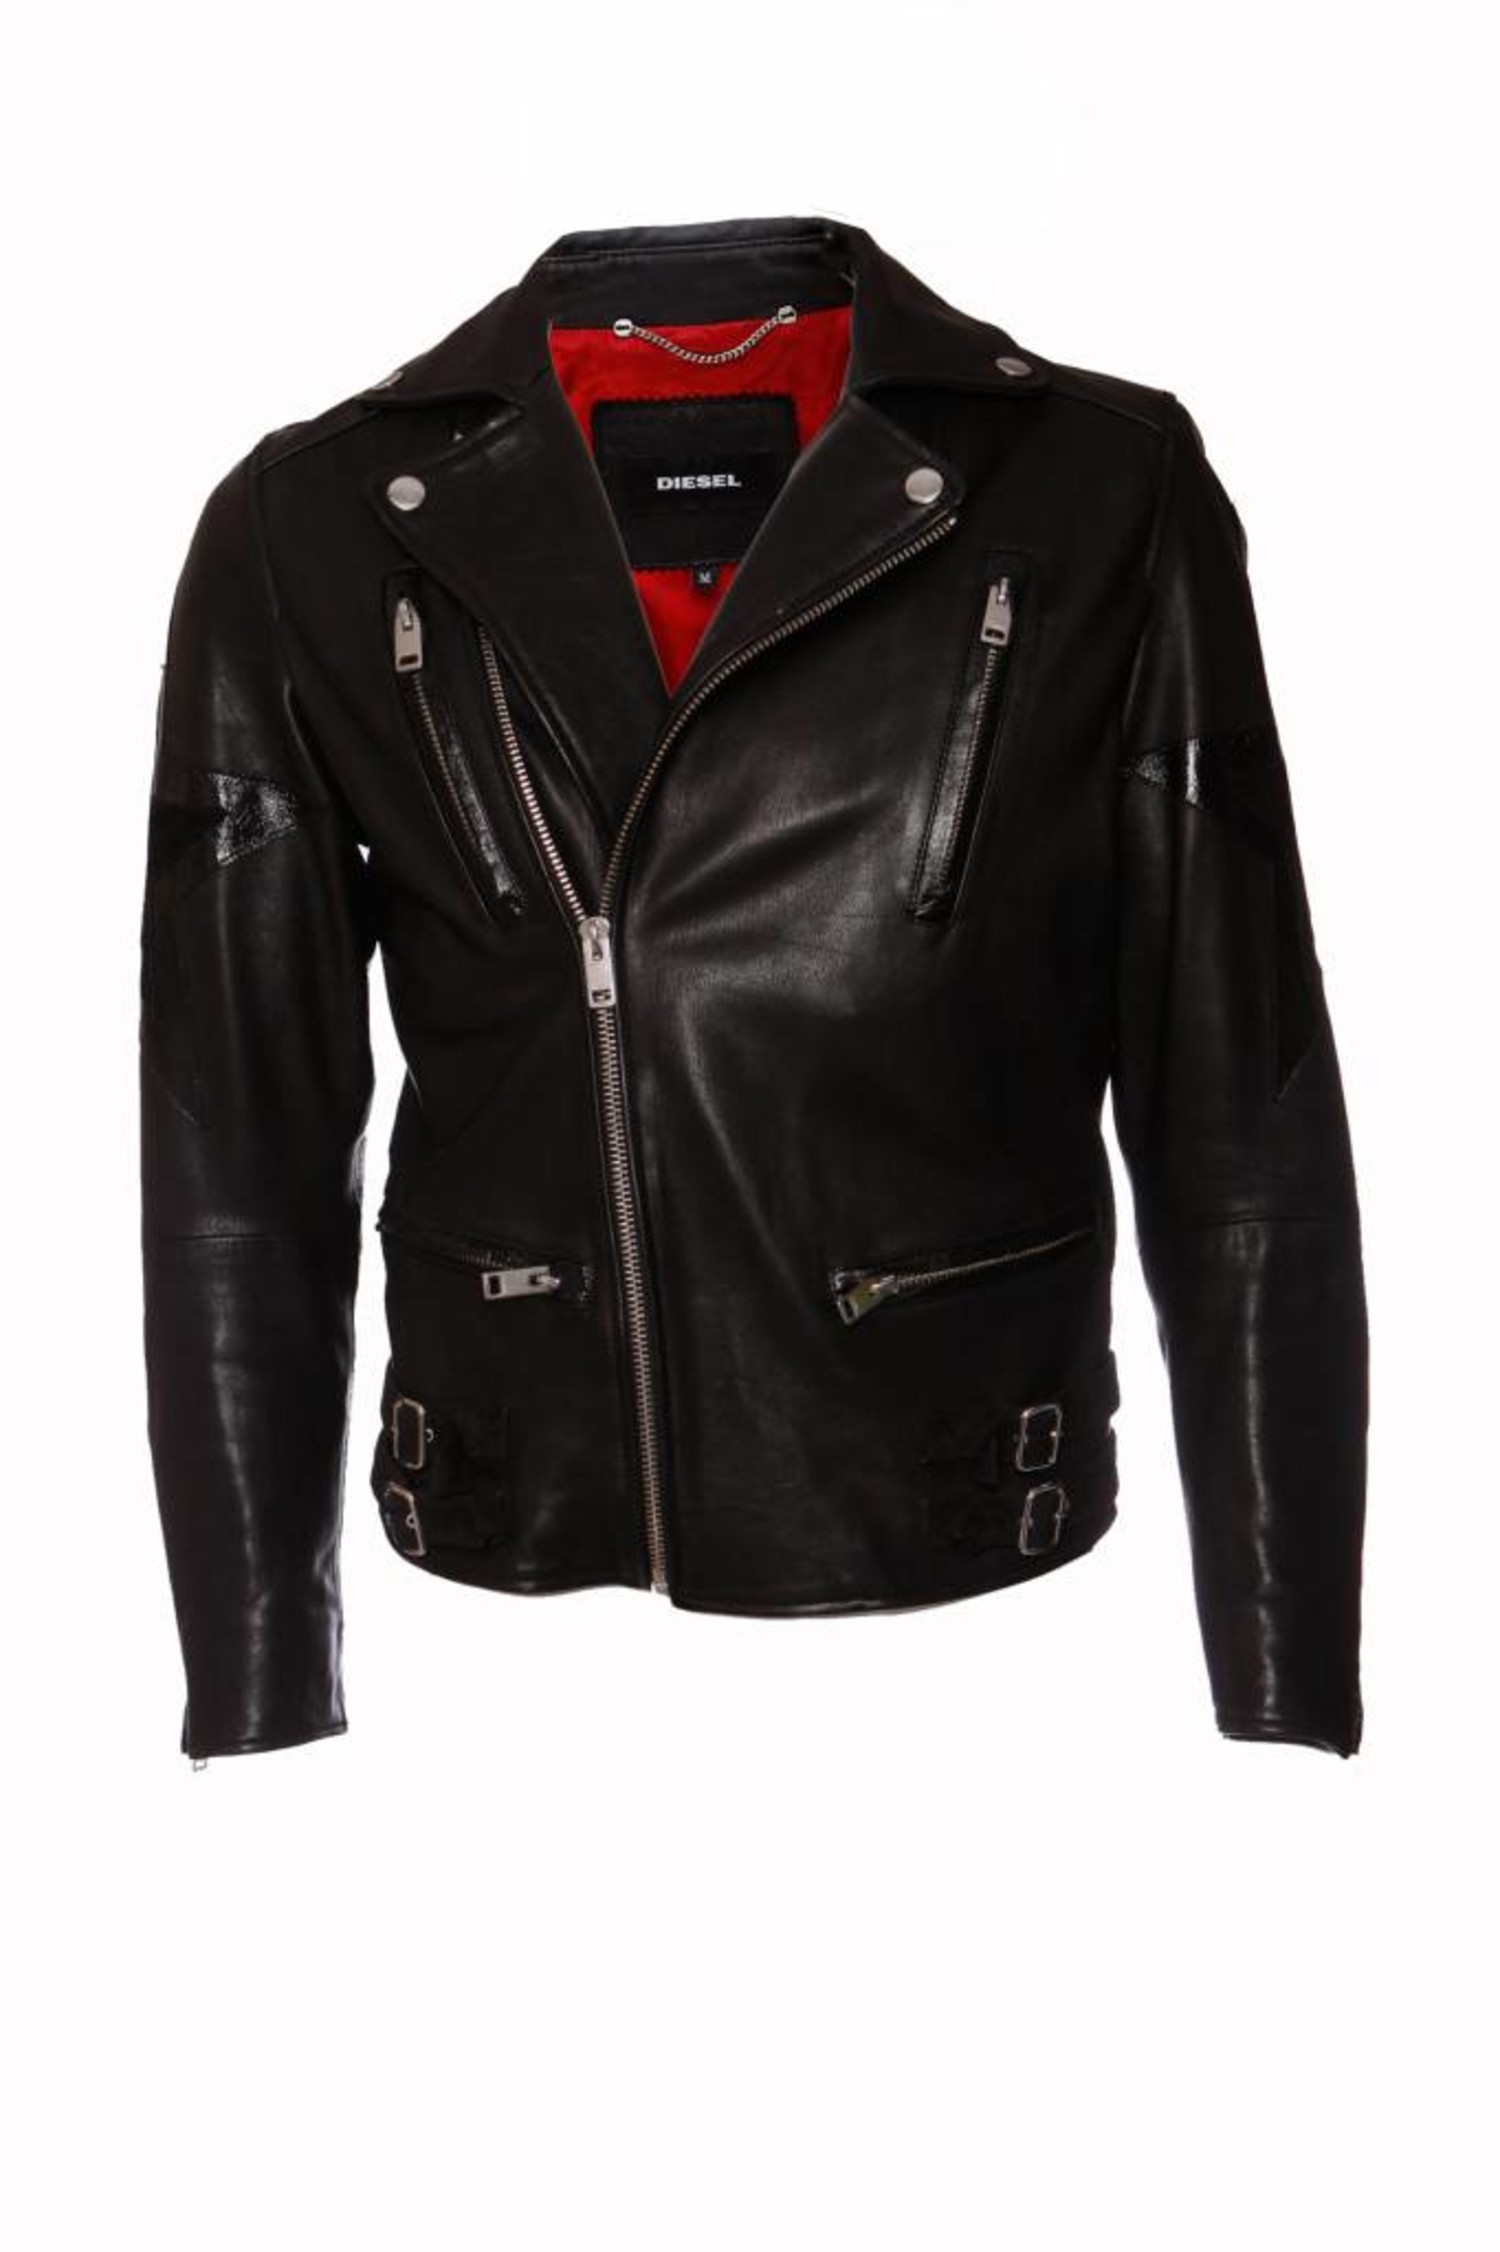 Diesel, Black leather jacket with star on the back in size M